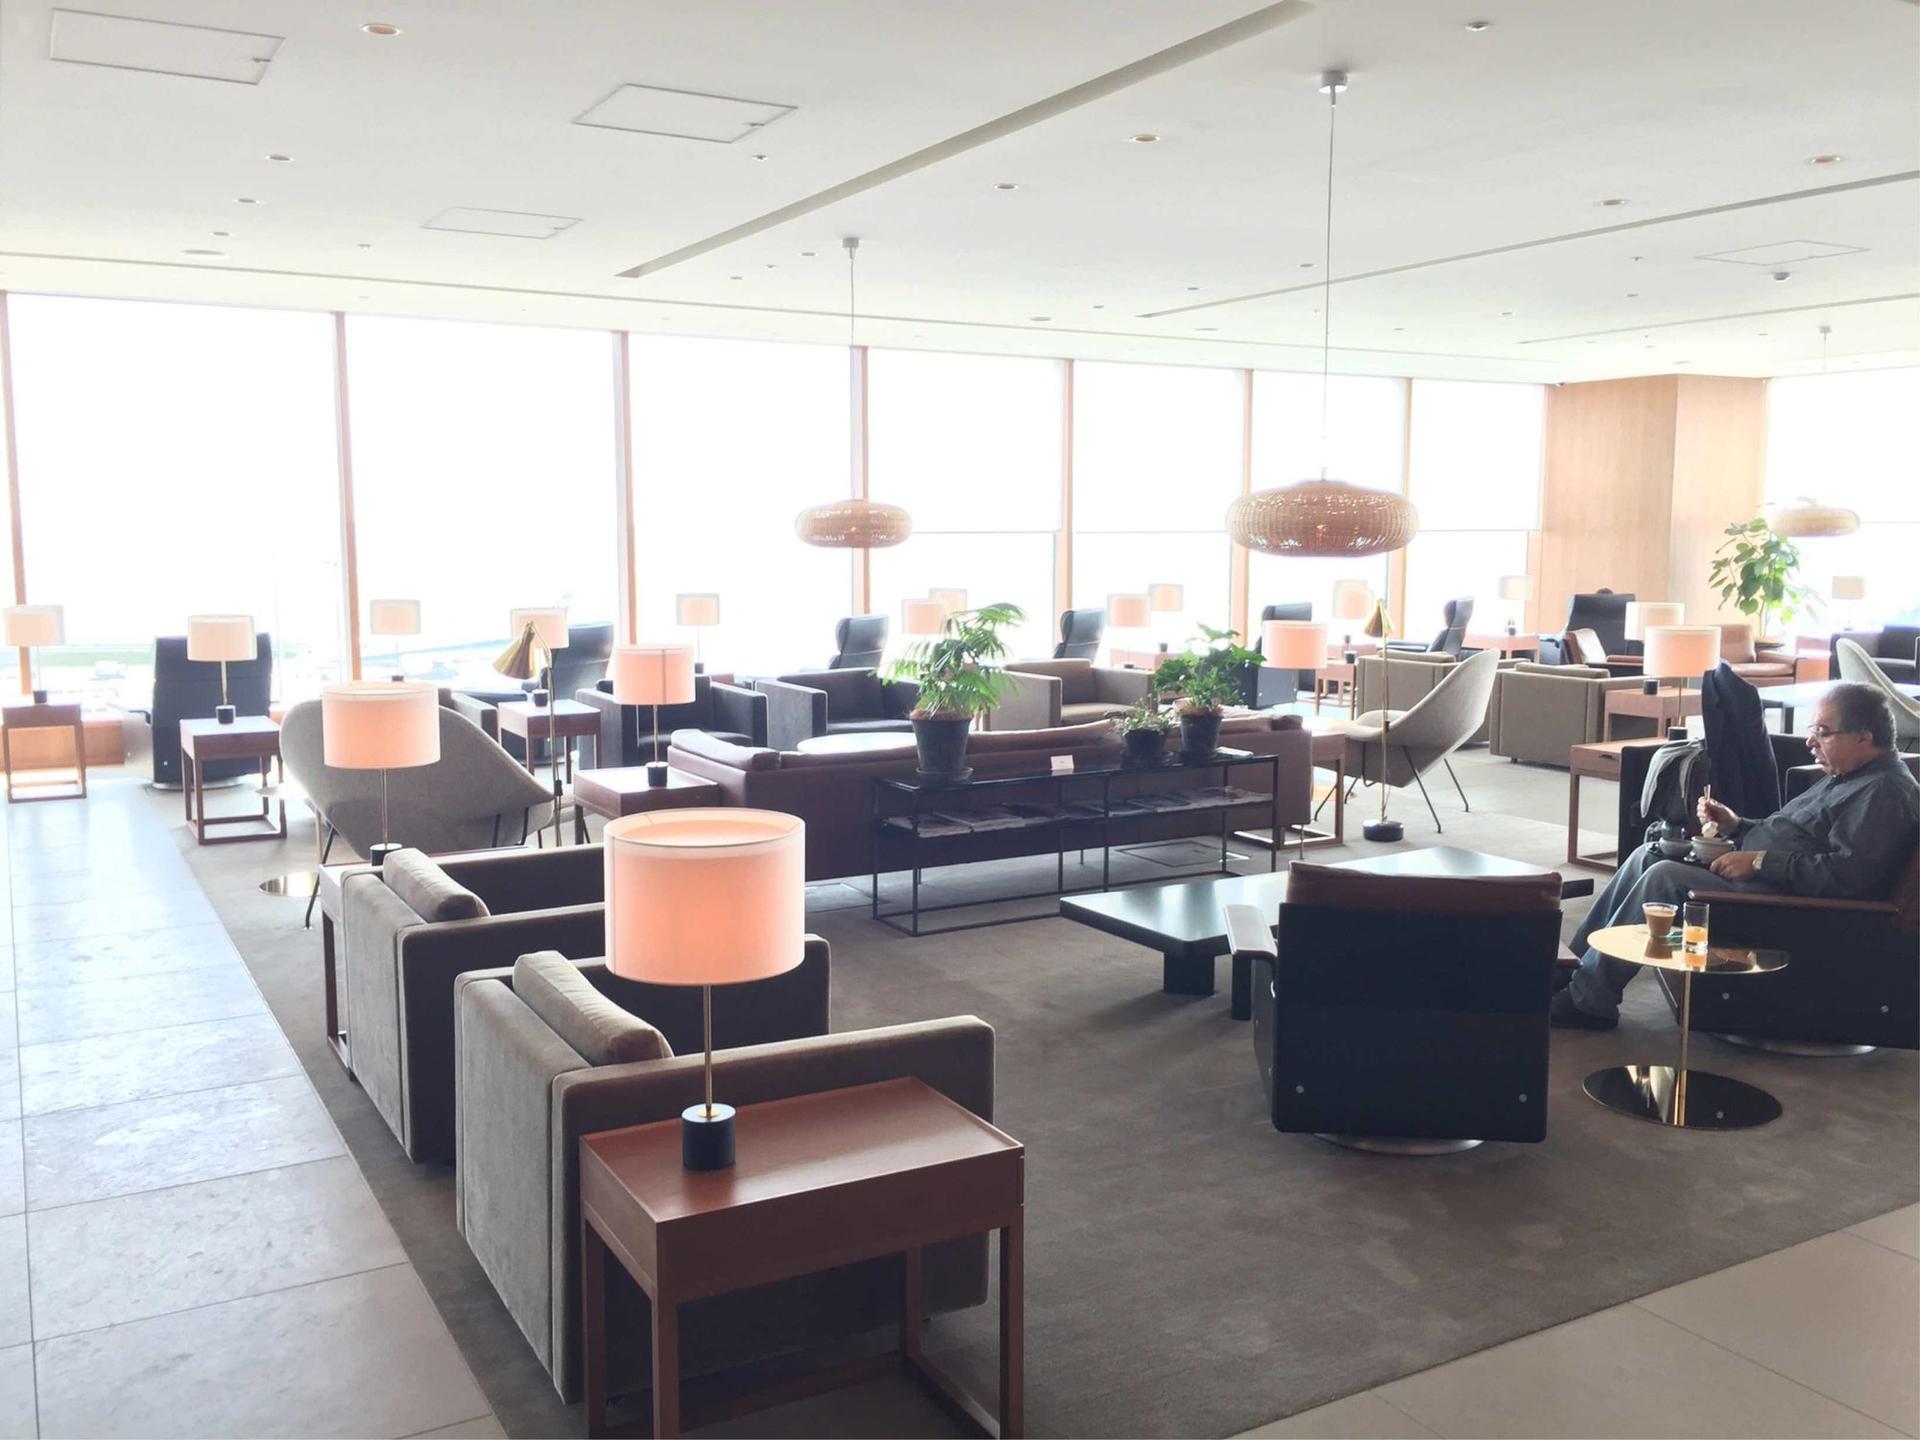 Cathay Pacific Lounge image 26 of 49